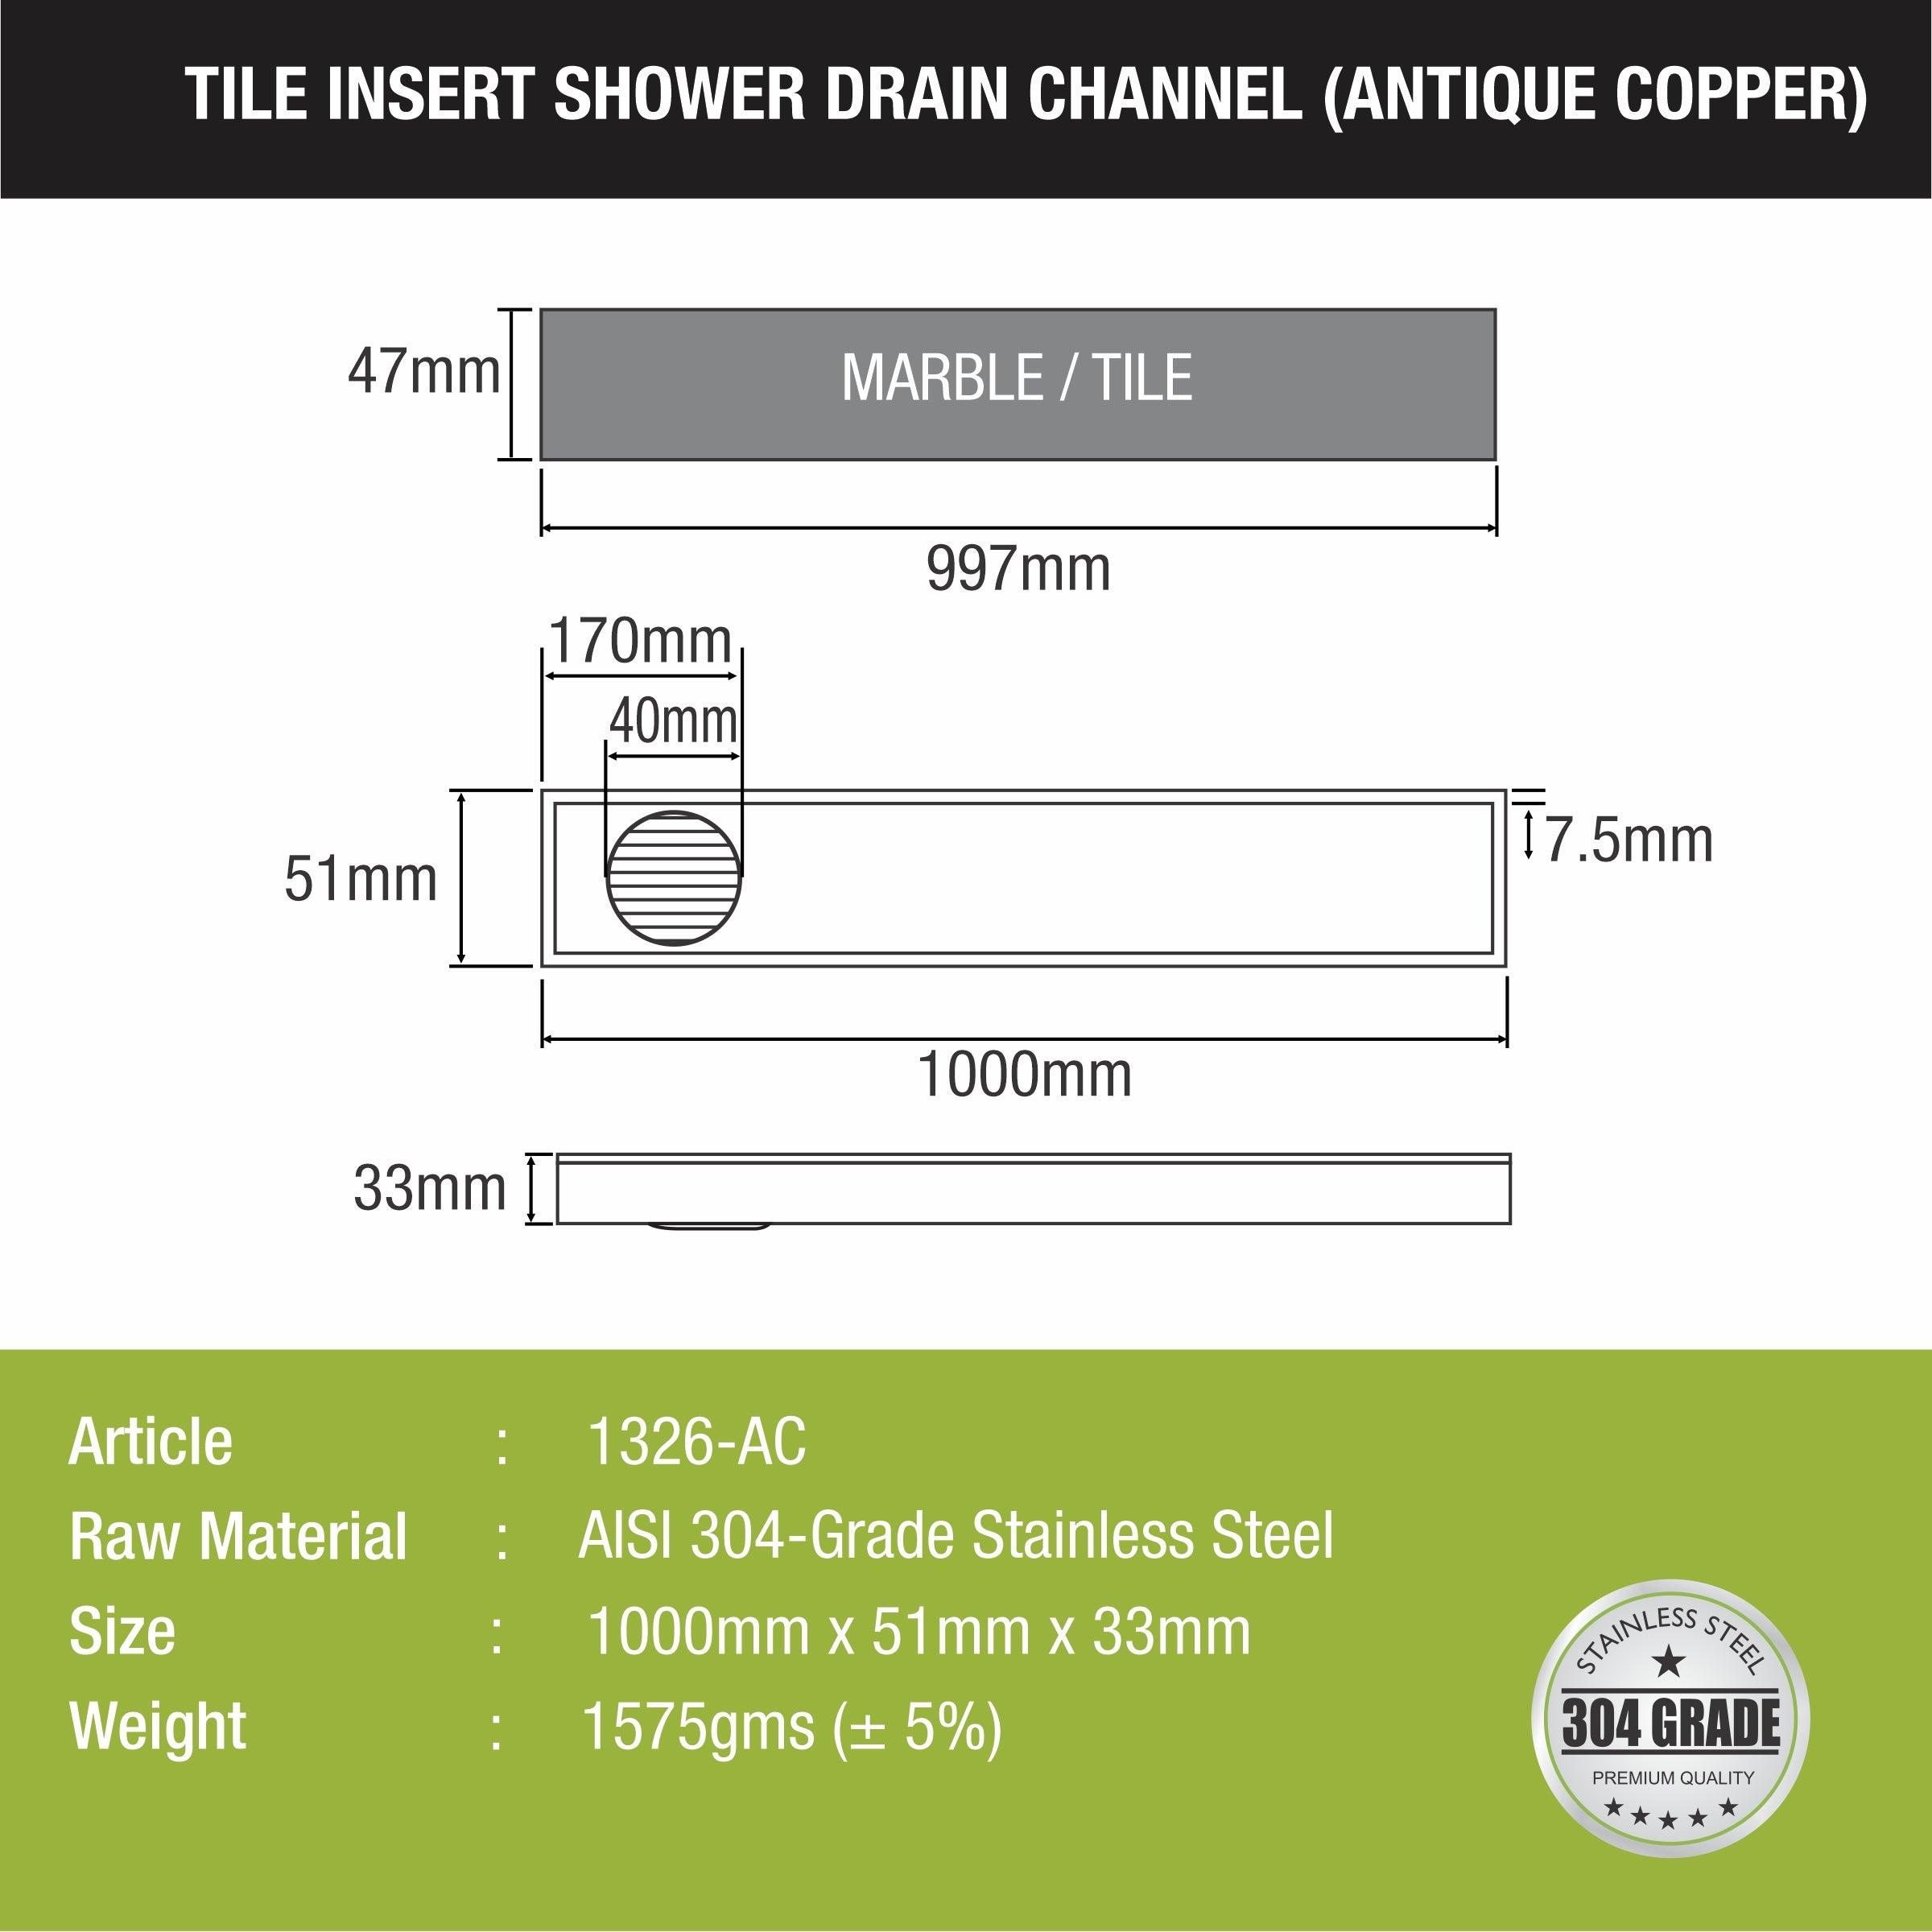 Tile Insert Shower Drain Channel - Antique Copper (40 x 2 Inches) sizes and dimensions